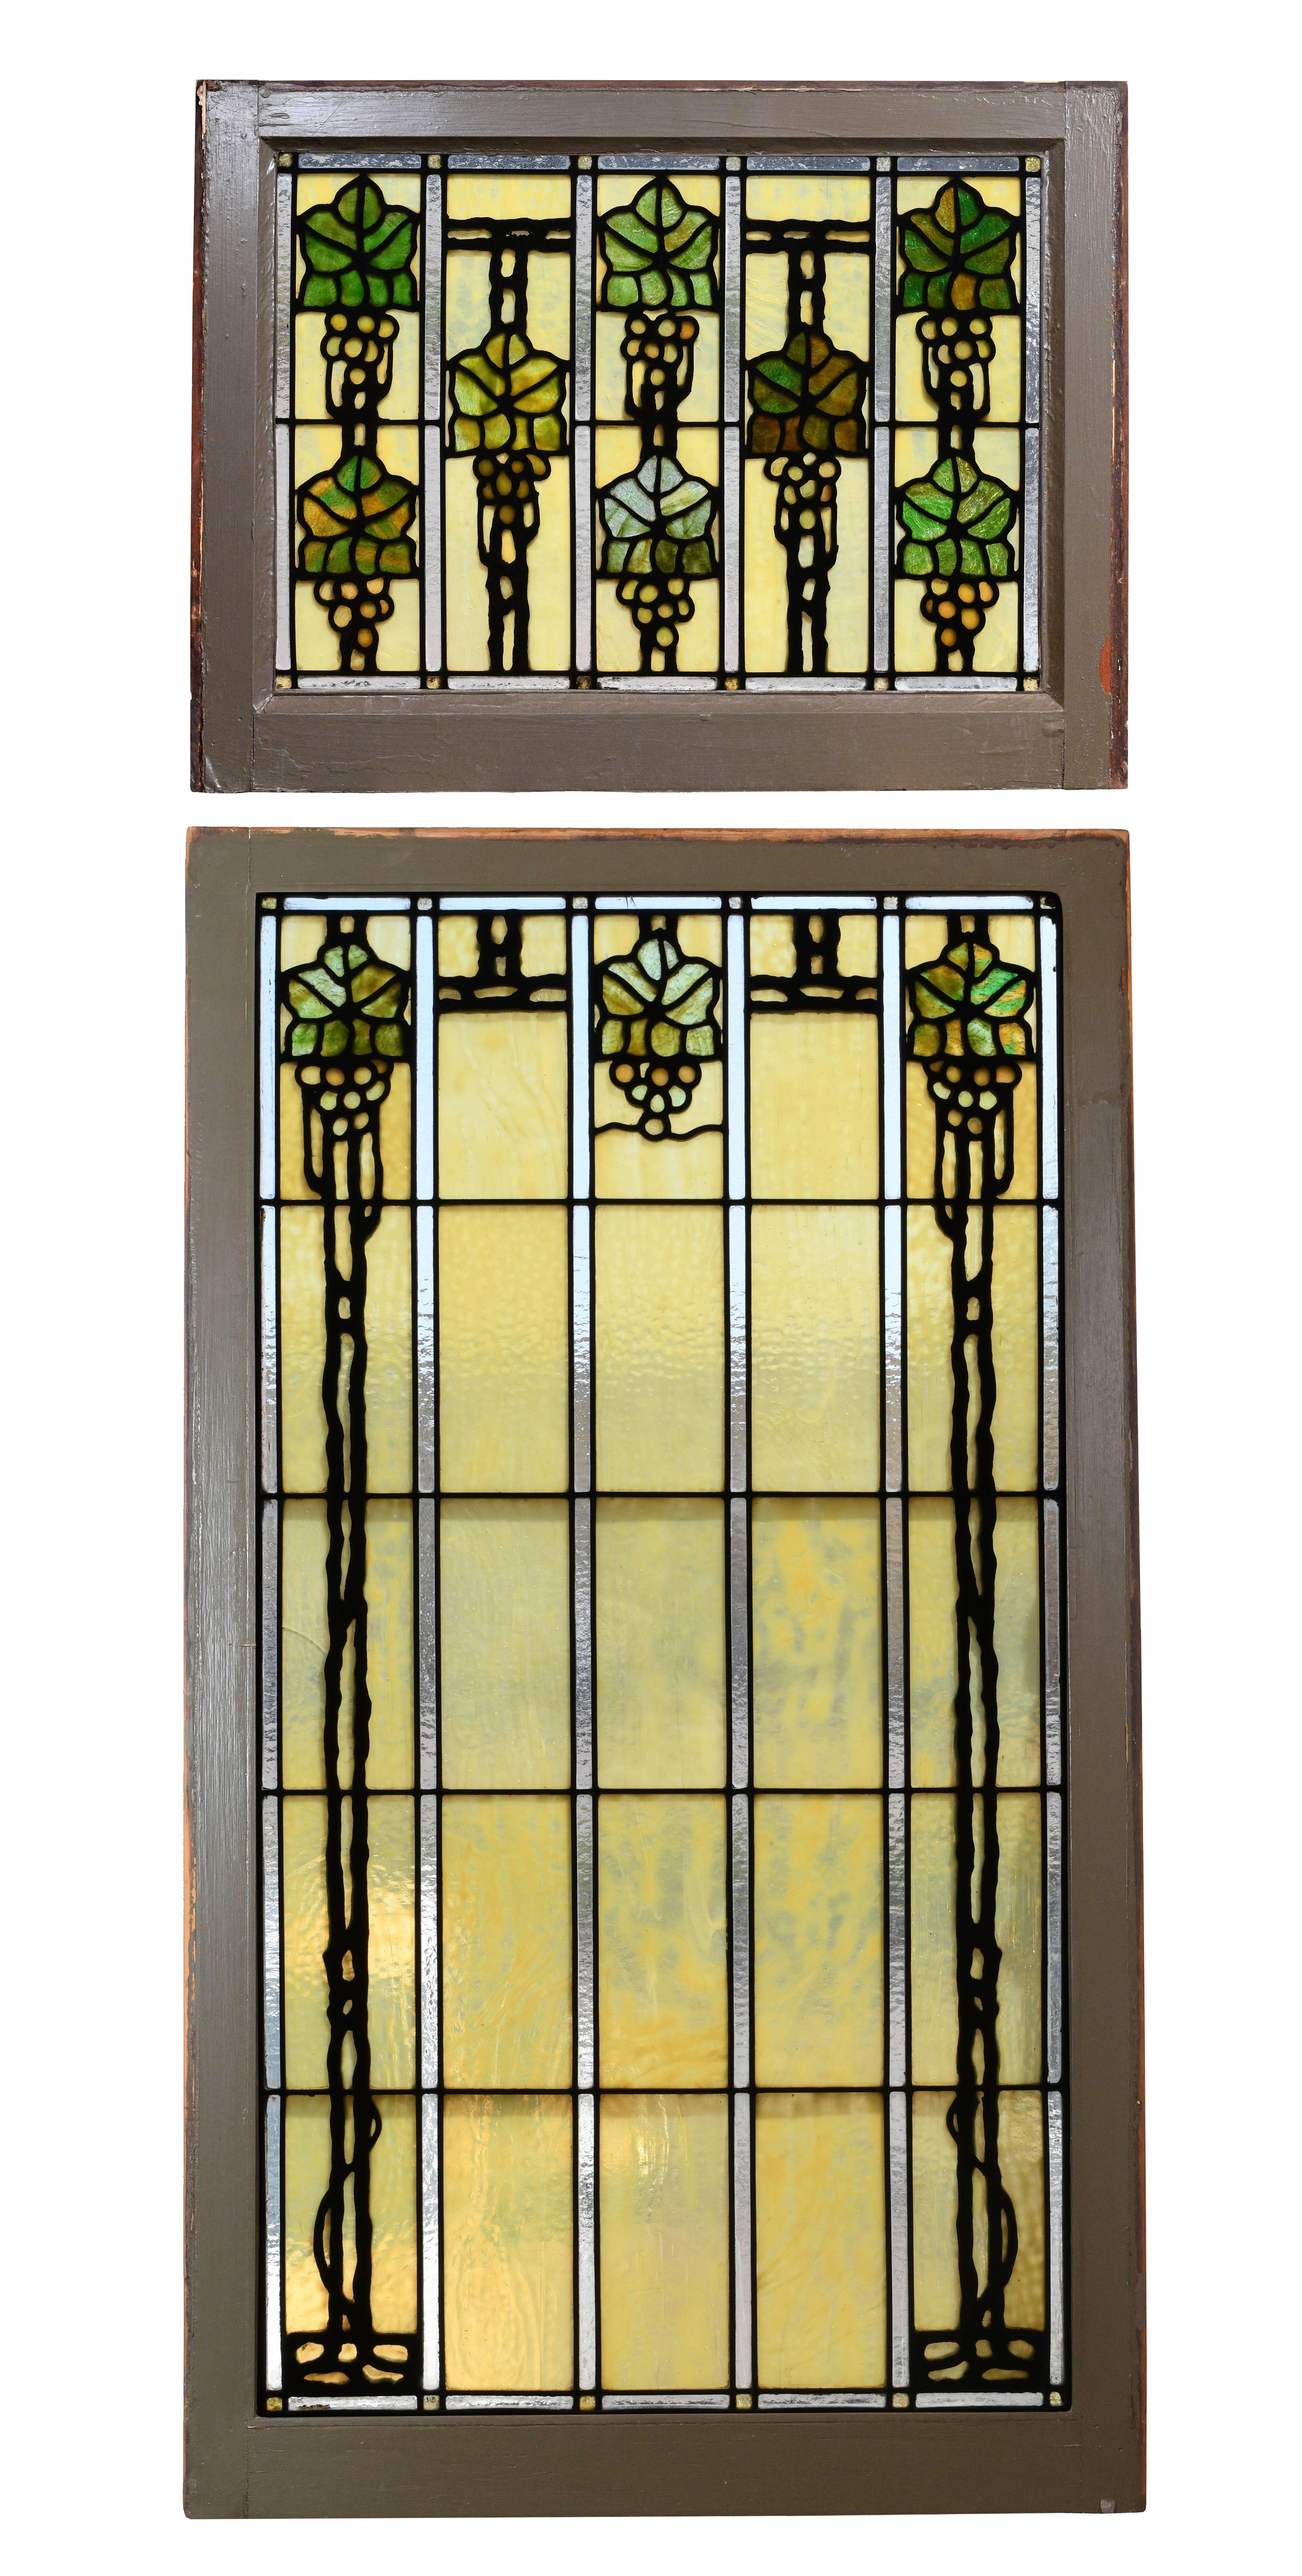 This incredible set of stained glass windows is attributed to John Bradstreet, a highly prominent craftsman in Minneapolis during the turn-of-the-century. Working out of the Minneapolis Crafthouse, he was an influential “taste-maker” in his pursuit